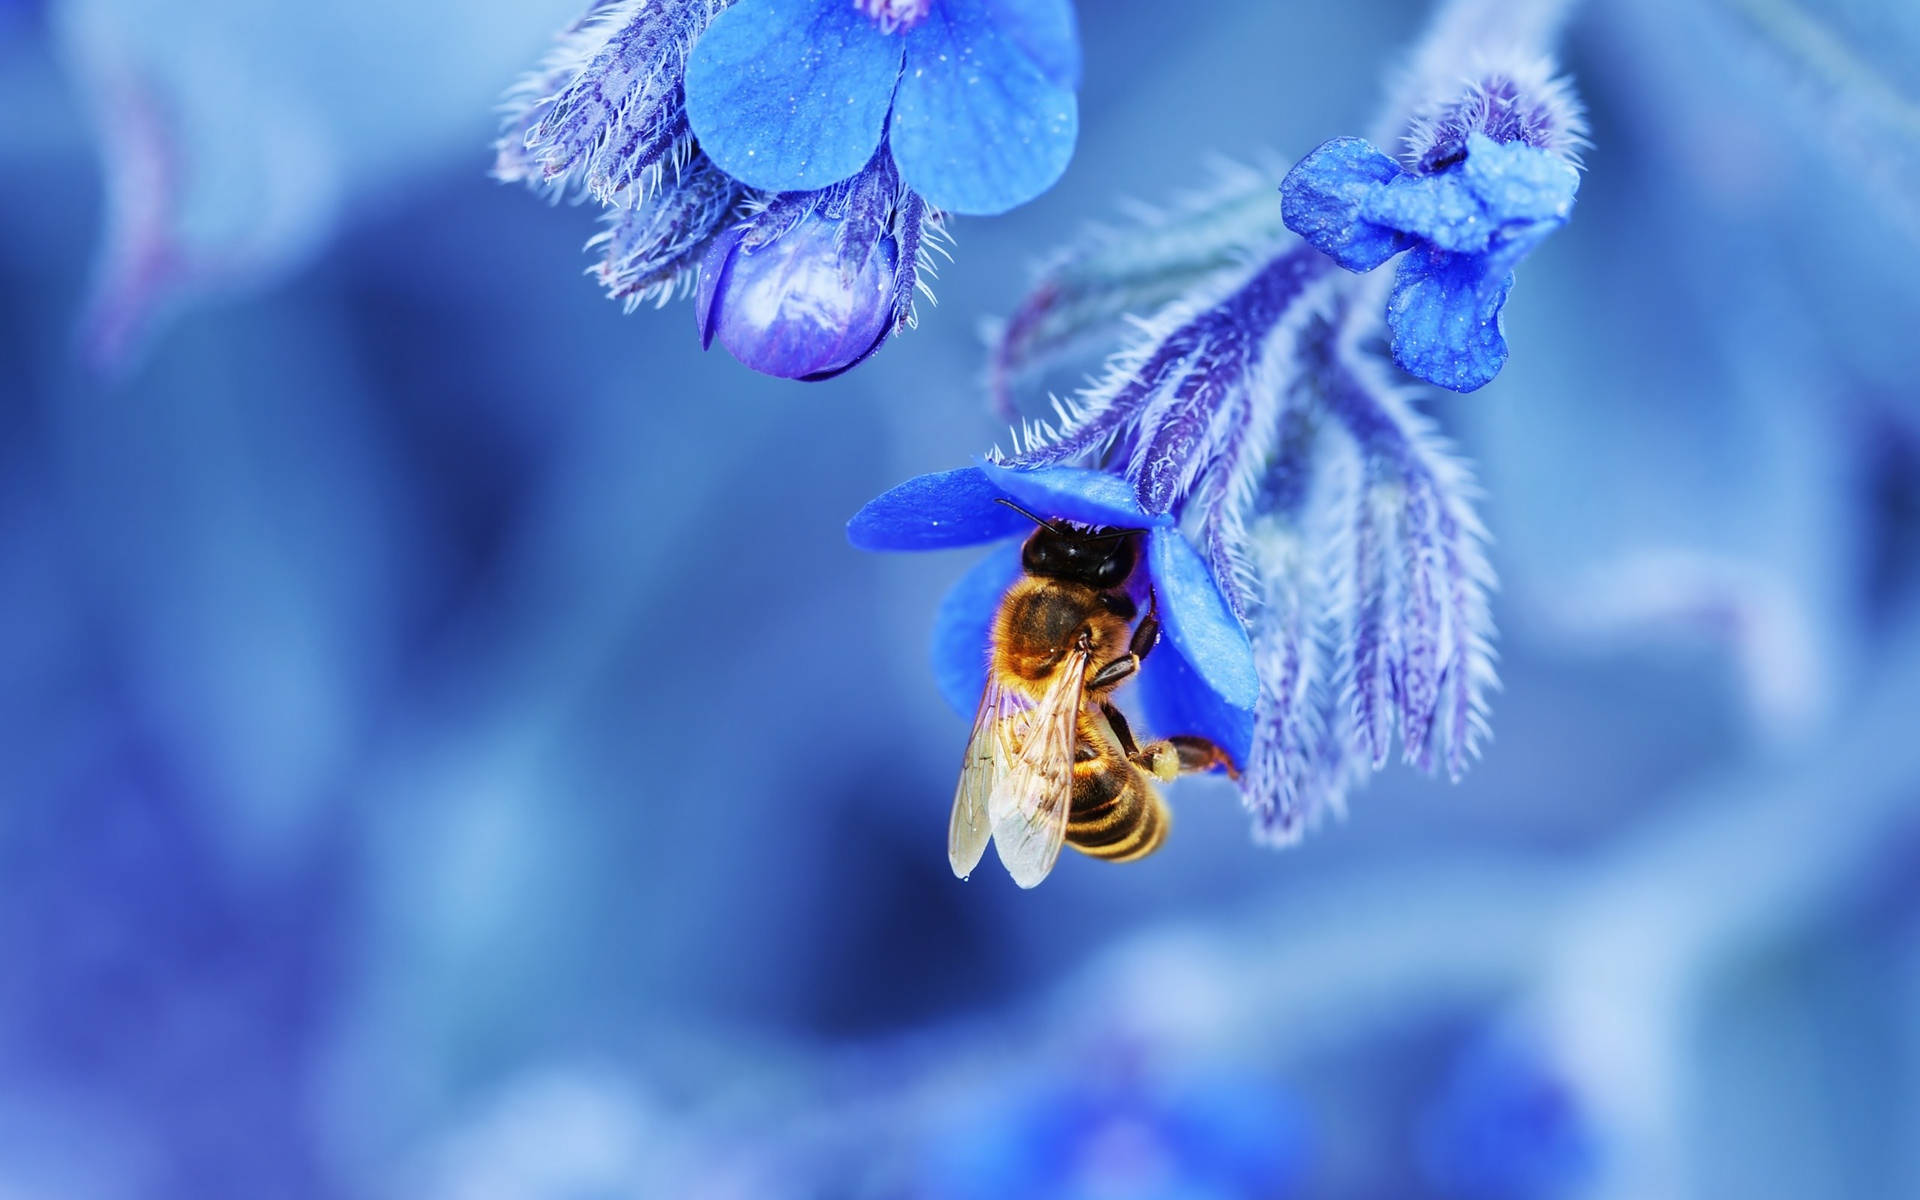 Insect Bee On Blue Flower Background